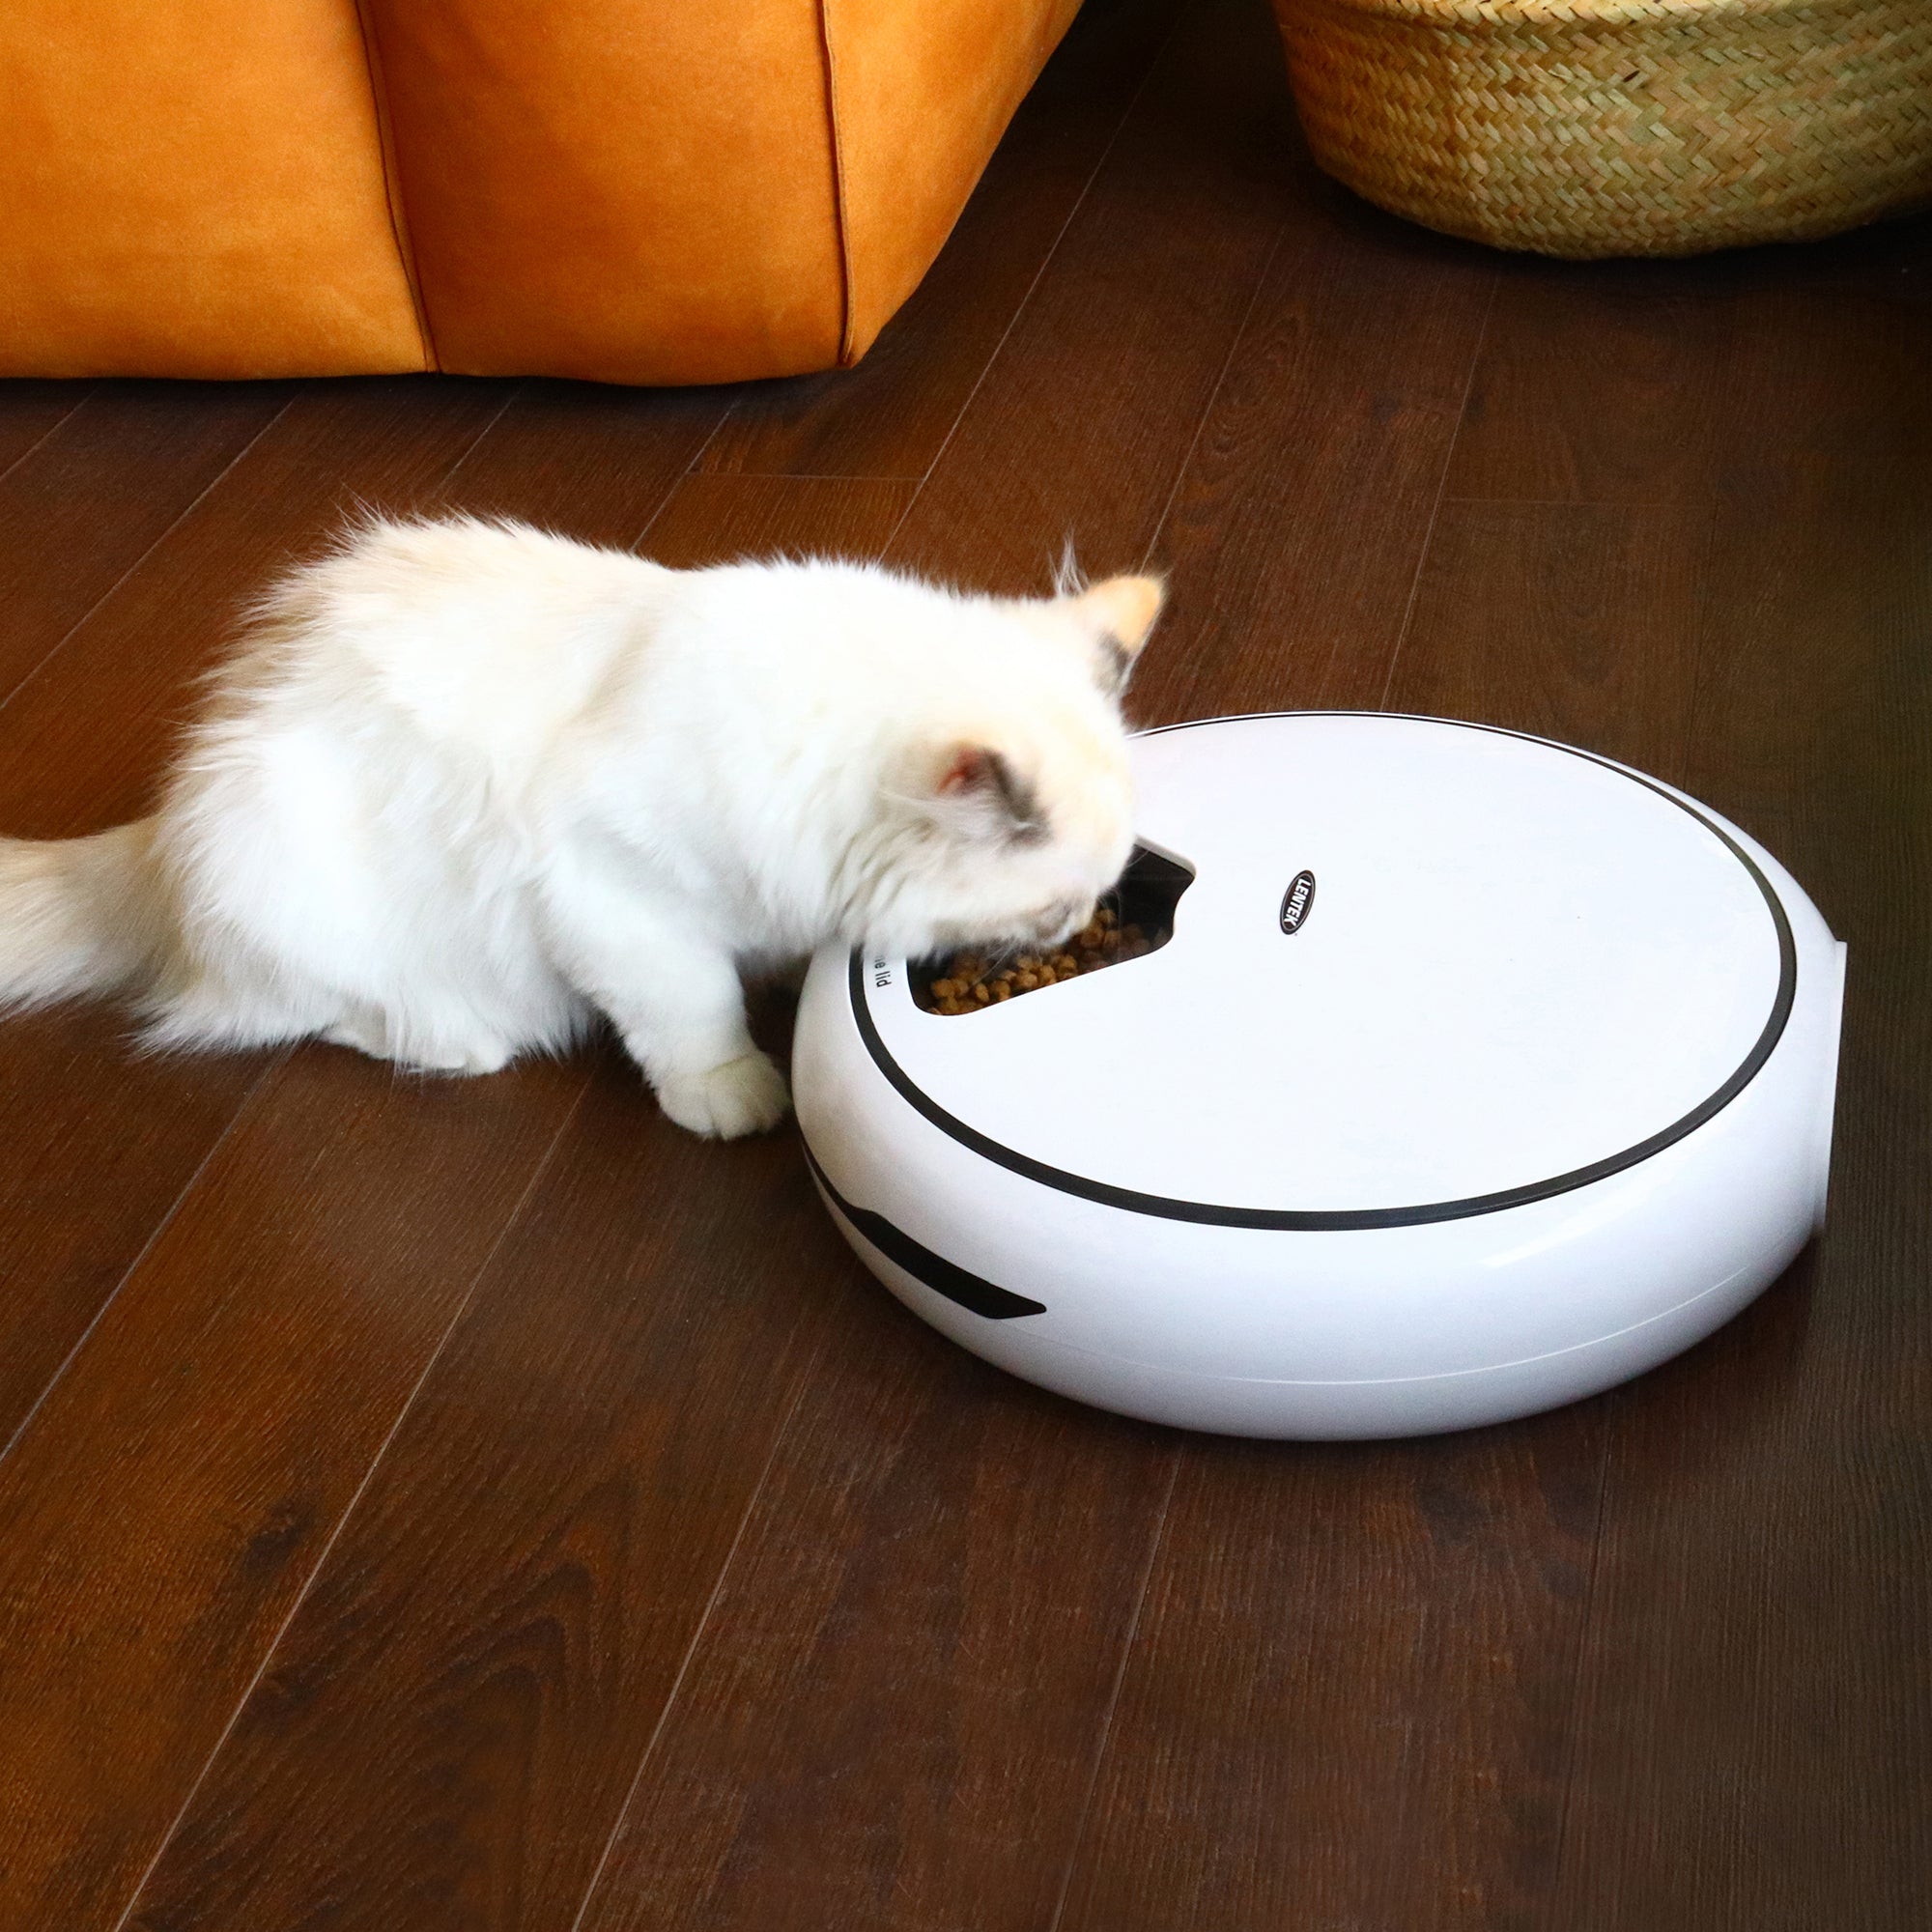 Lifestyle image of a cream-colored long-haired kitten eating from the Lentek automatic pet feeder on a dark wooden floor with an orange leather sofa in the background